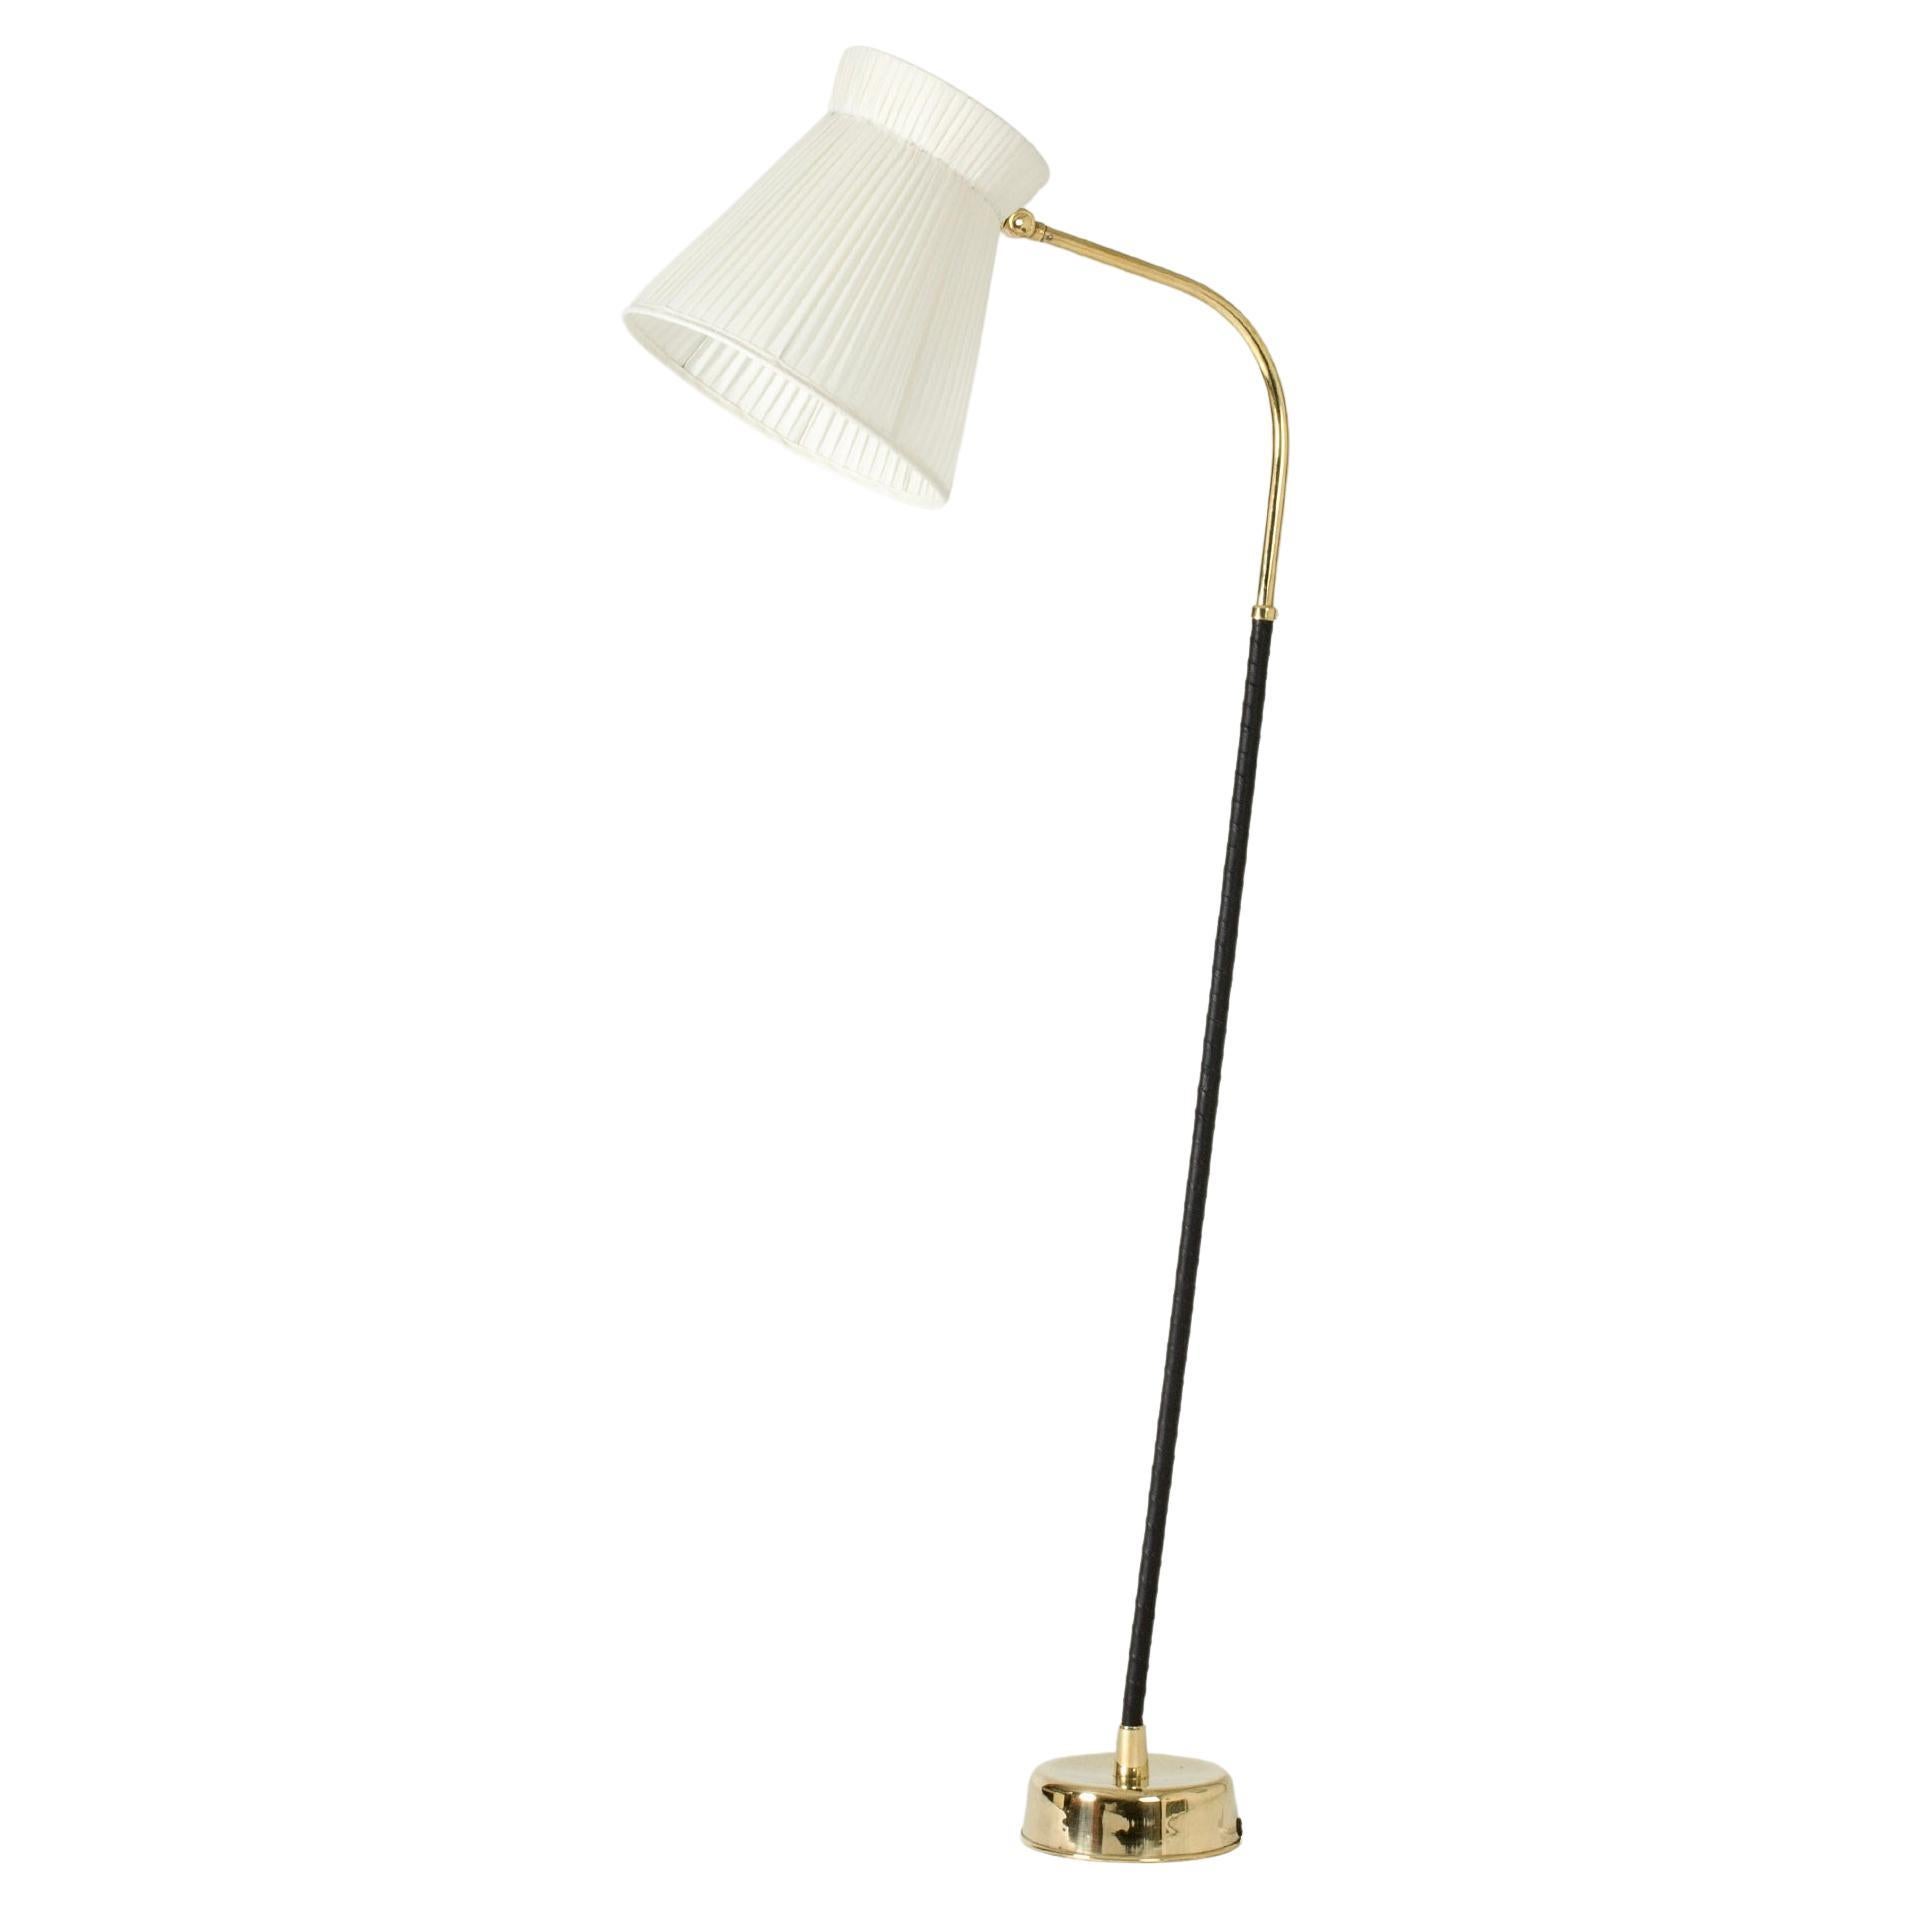 Midcentury Modern Floor Lamp by Lisa Johansson-Pape for Orno, Finland